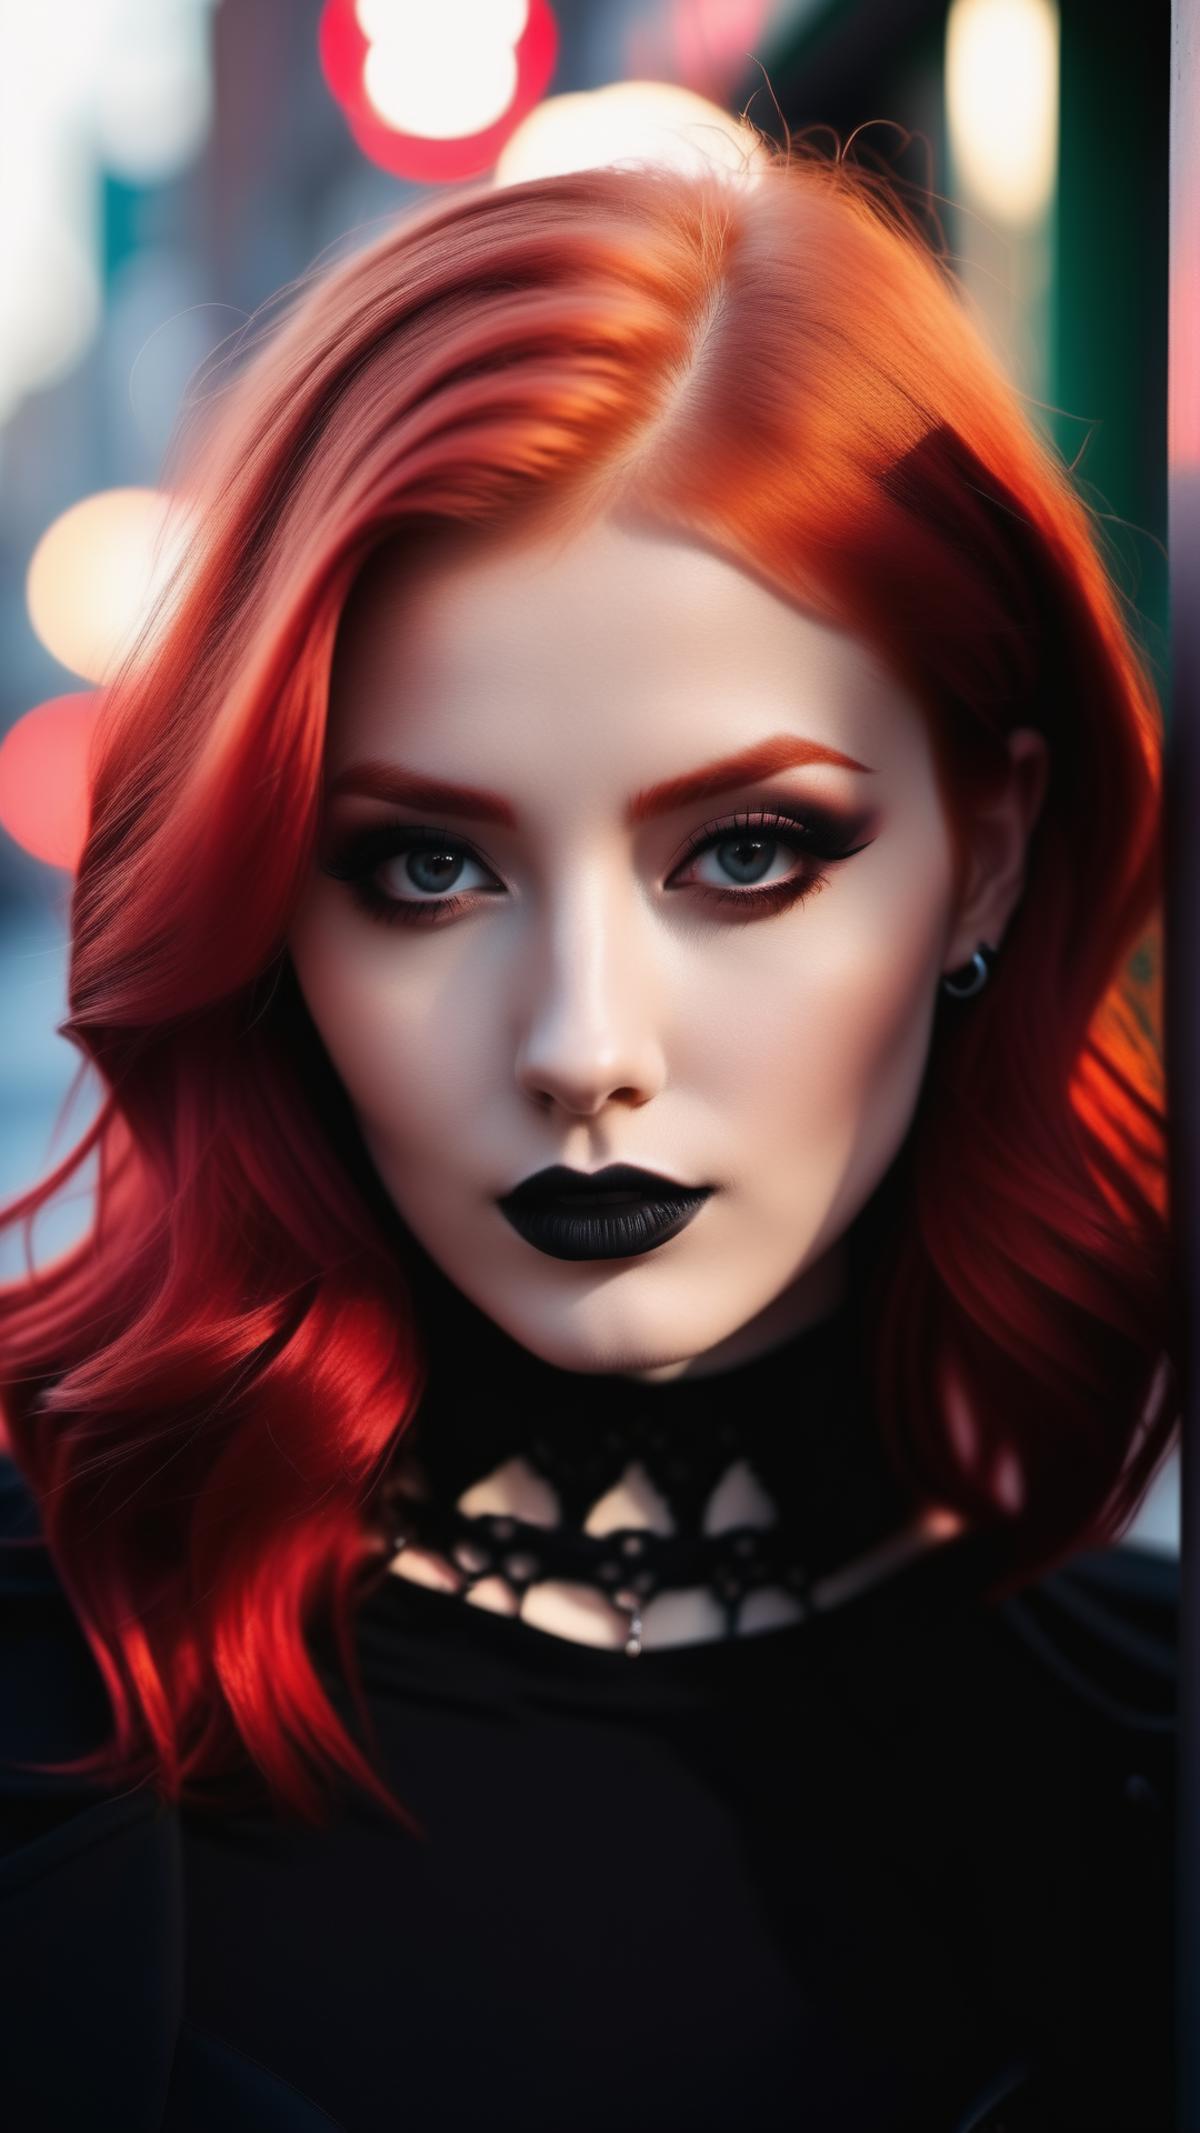 Woman with Red Hair, Dark Makeup, and Black Clothes